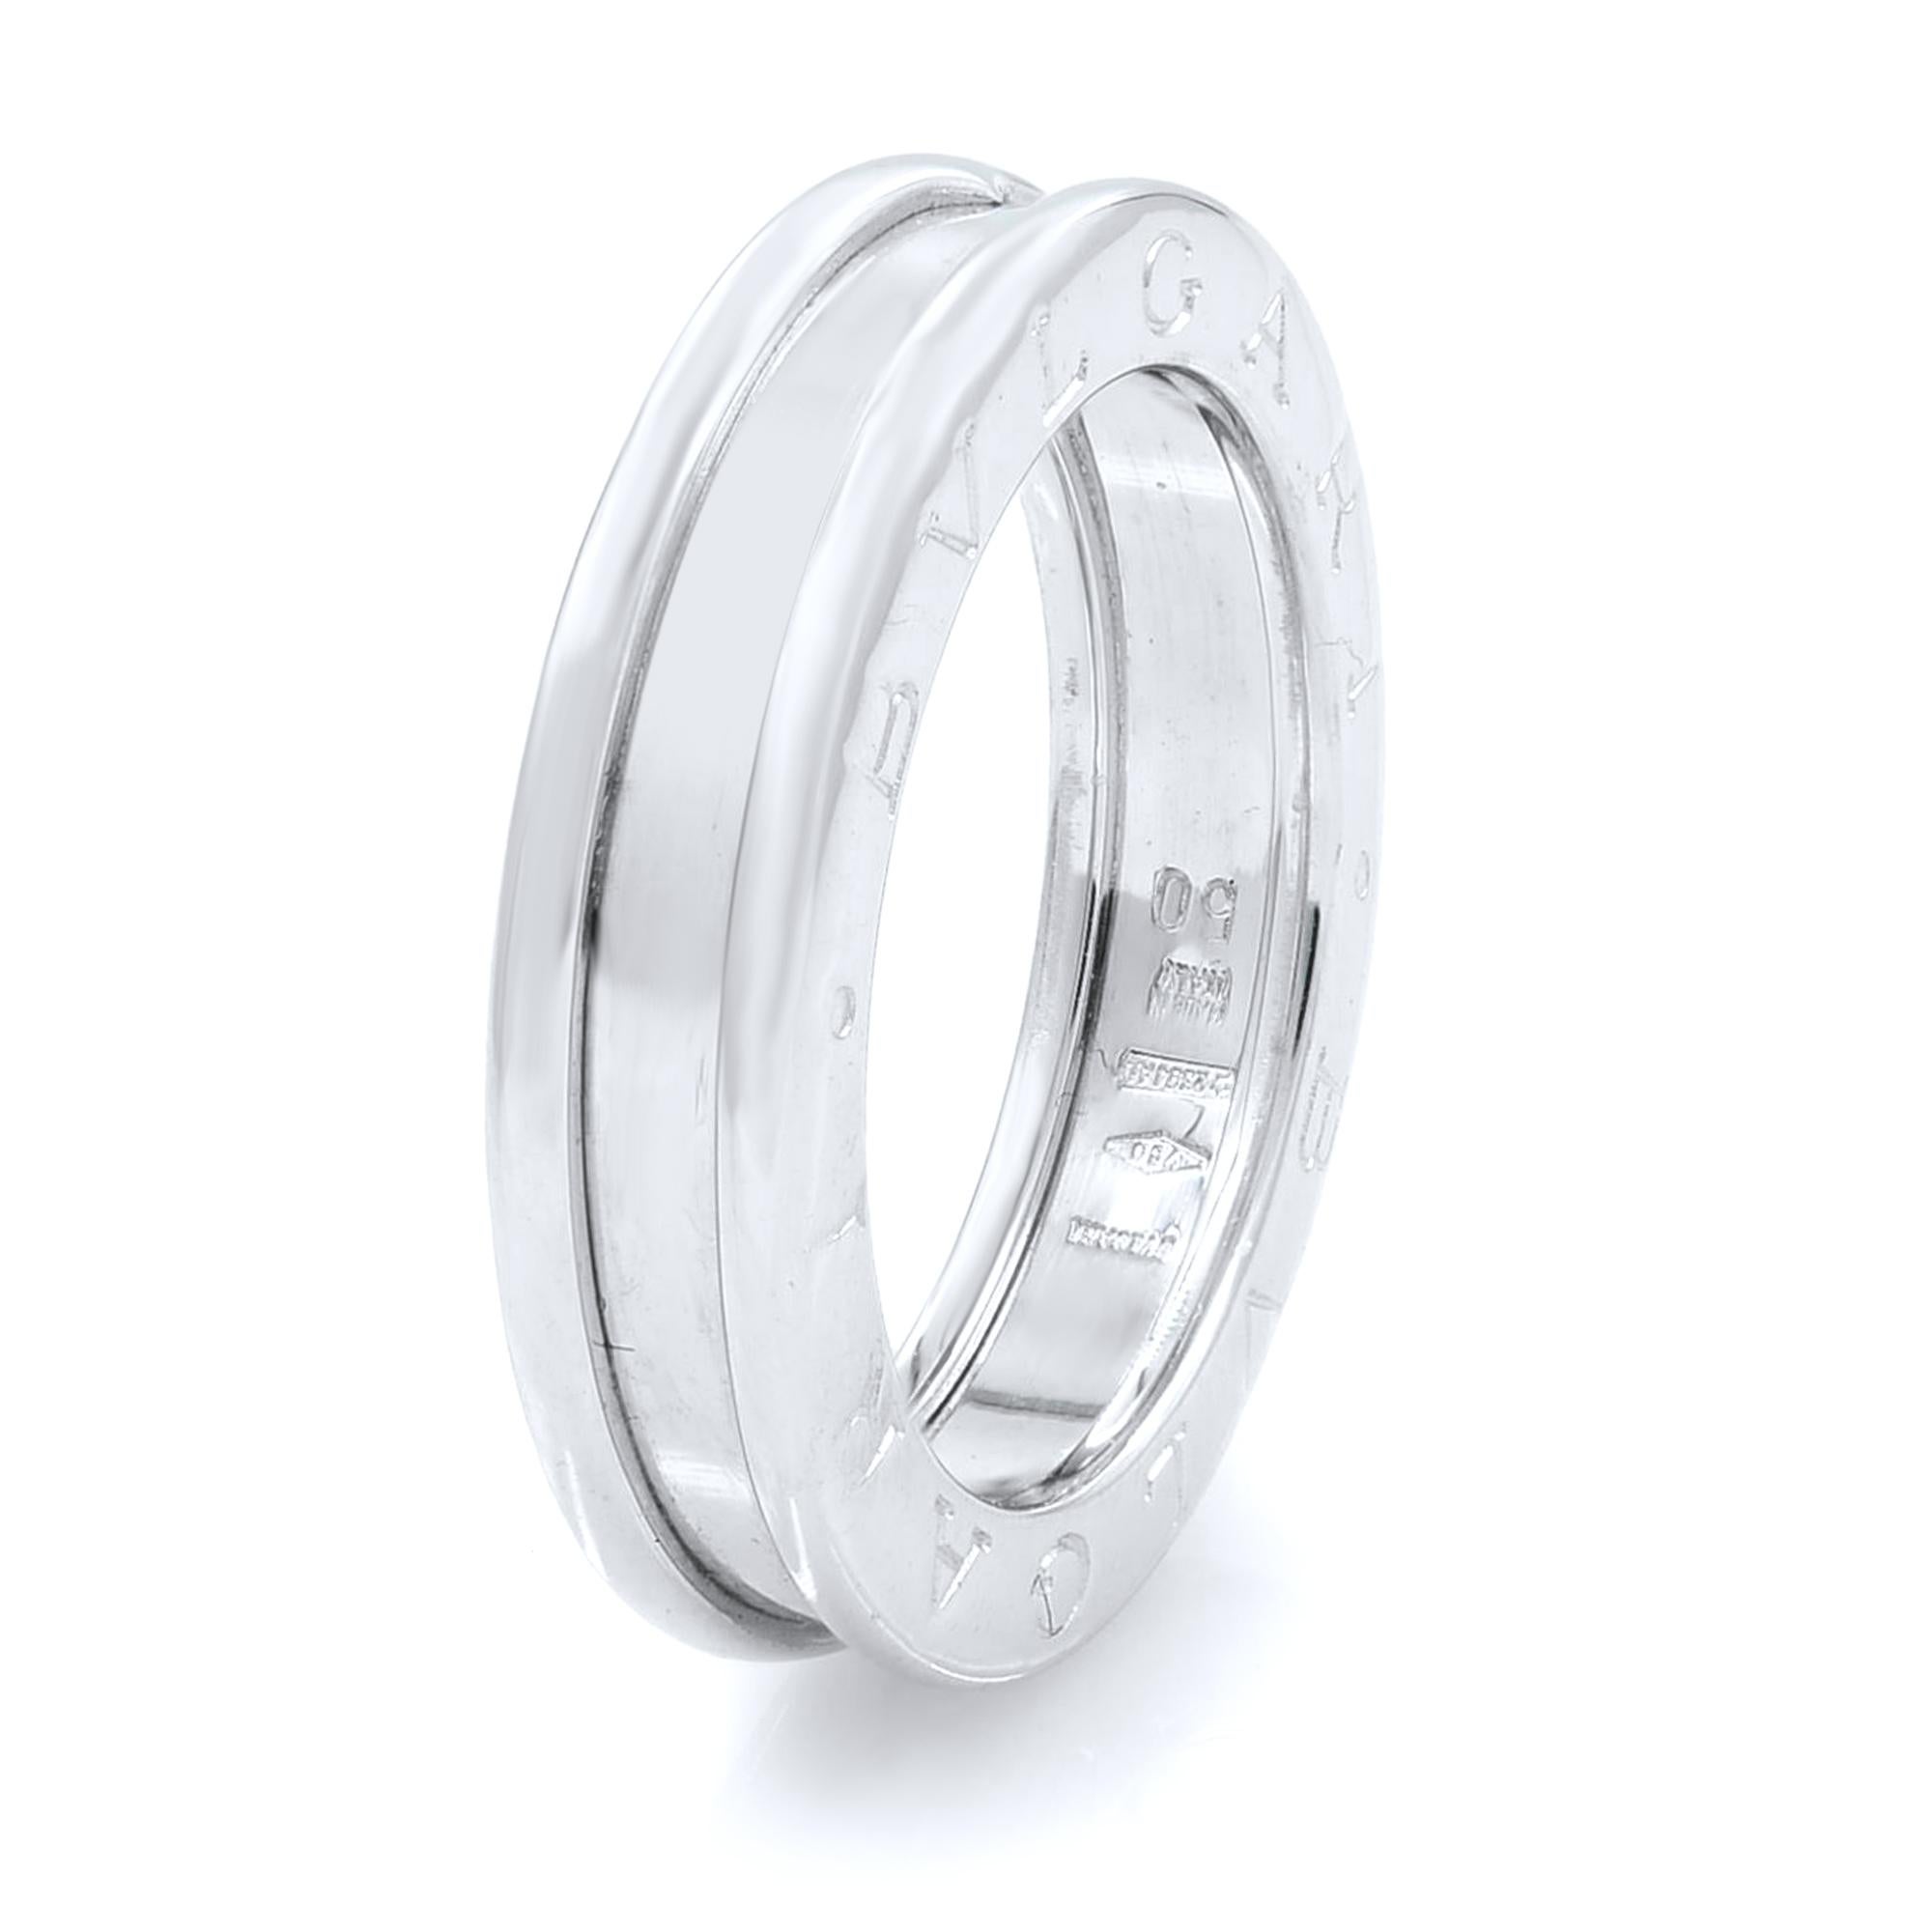 The B.Zero ring is a signature piece from the legendary jewelry design house Bvlgari. It features a clean, modern design with a white gold central band surrounded by two white gold rims with the BVLGARI logo engraved on both sides. You will love